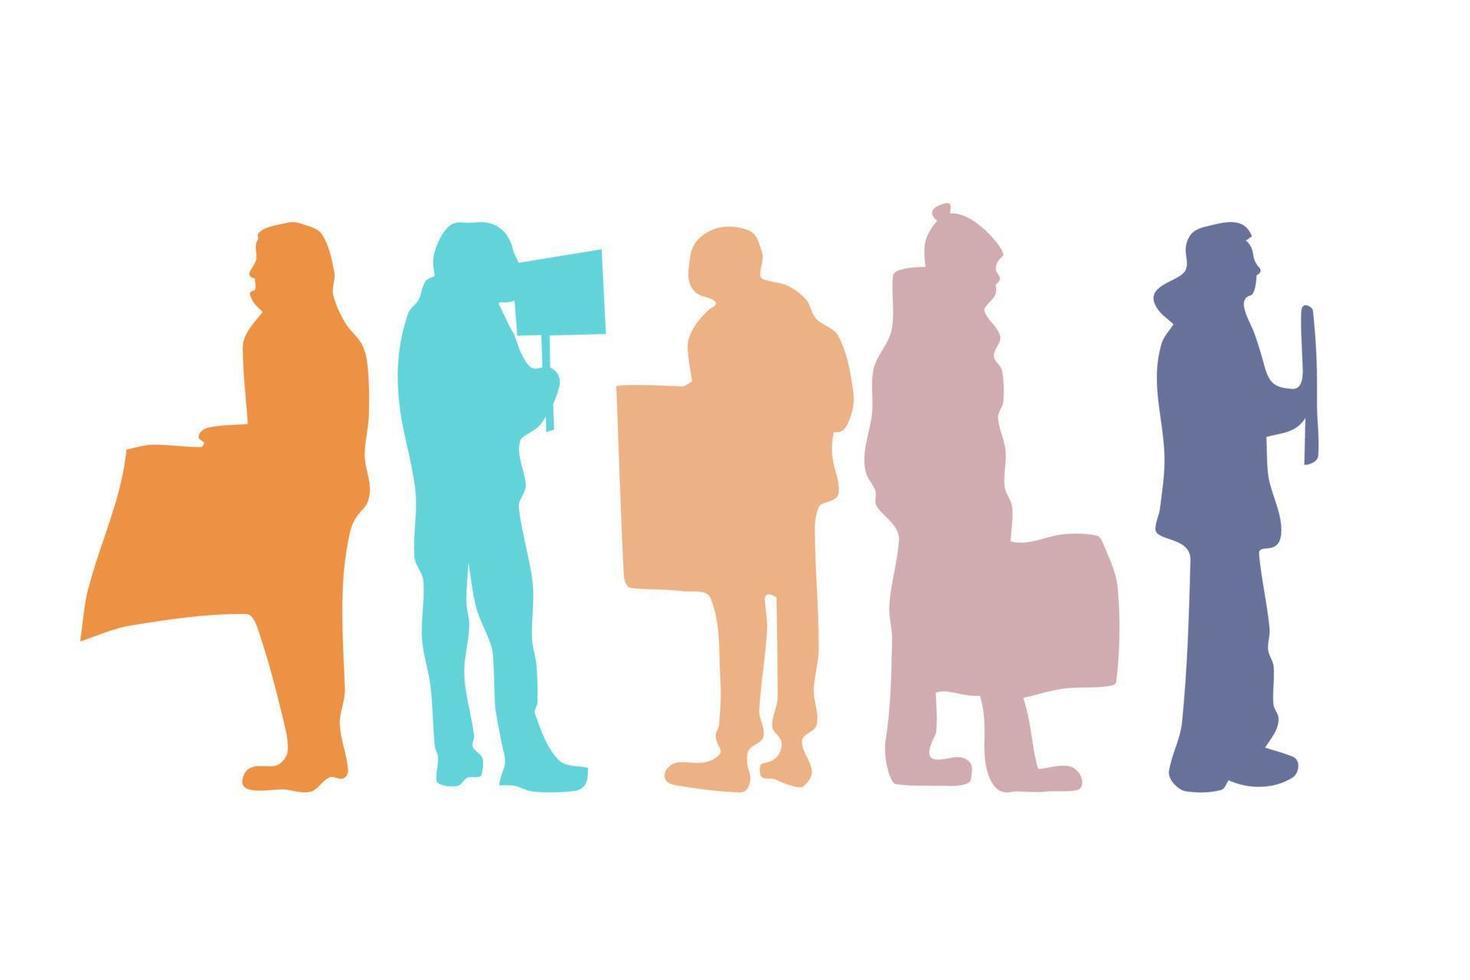 Group of people color silhouettes. Men protesters with placard different poses. Growd of people standing together. For any type of protest. Flat vector illustration.